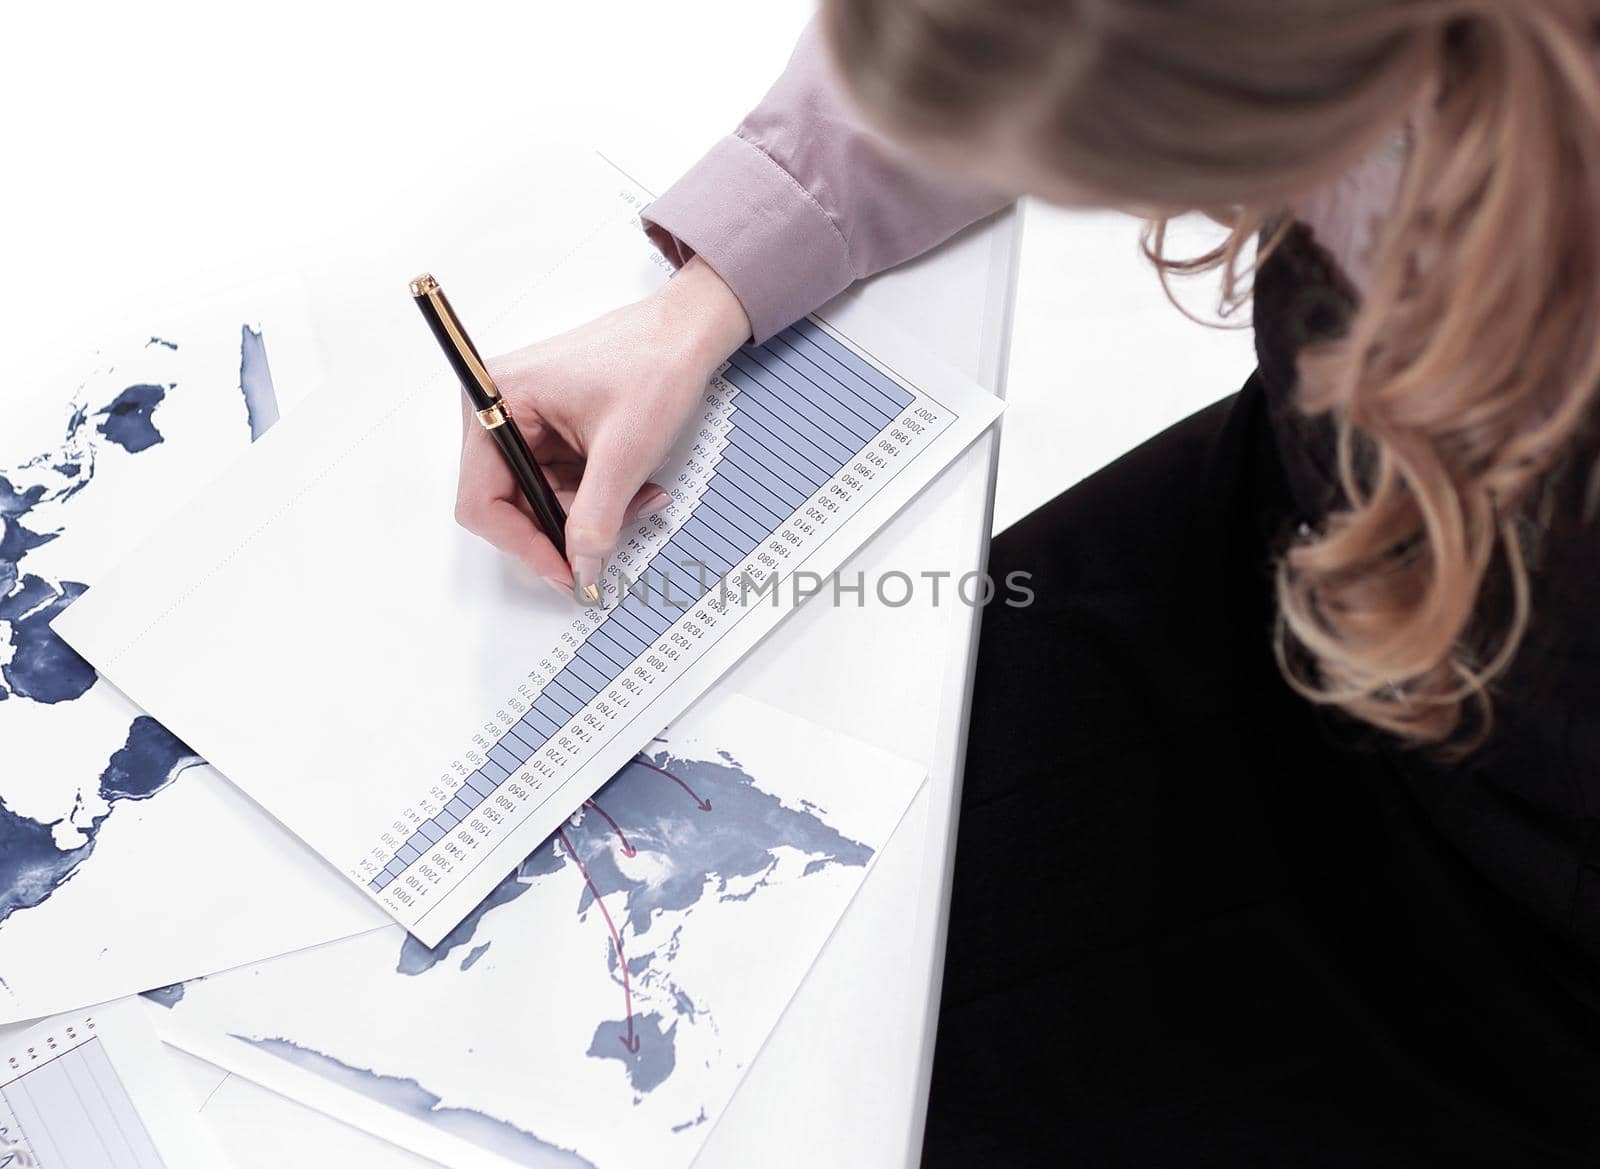 view from the top. young woman sitting at Desk and looking at camera.